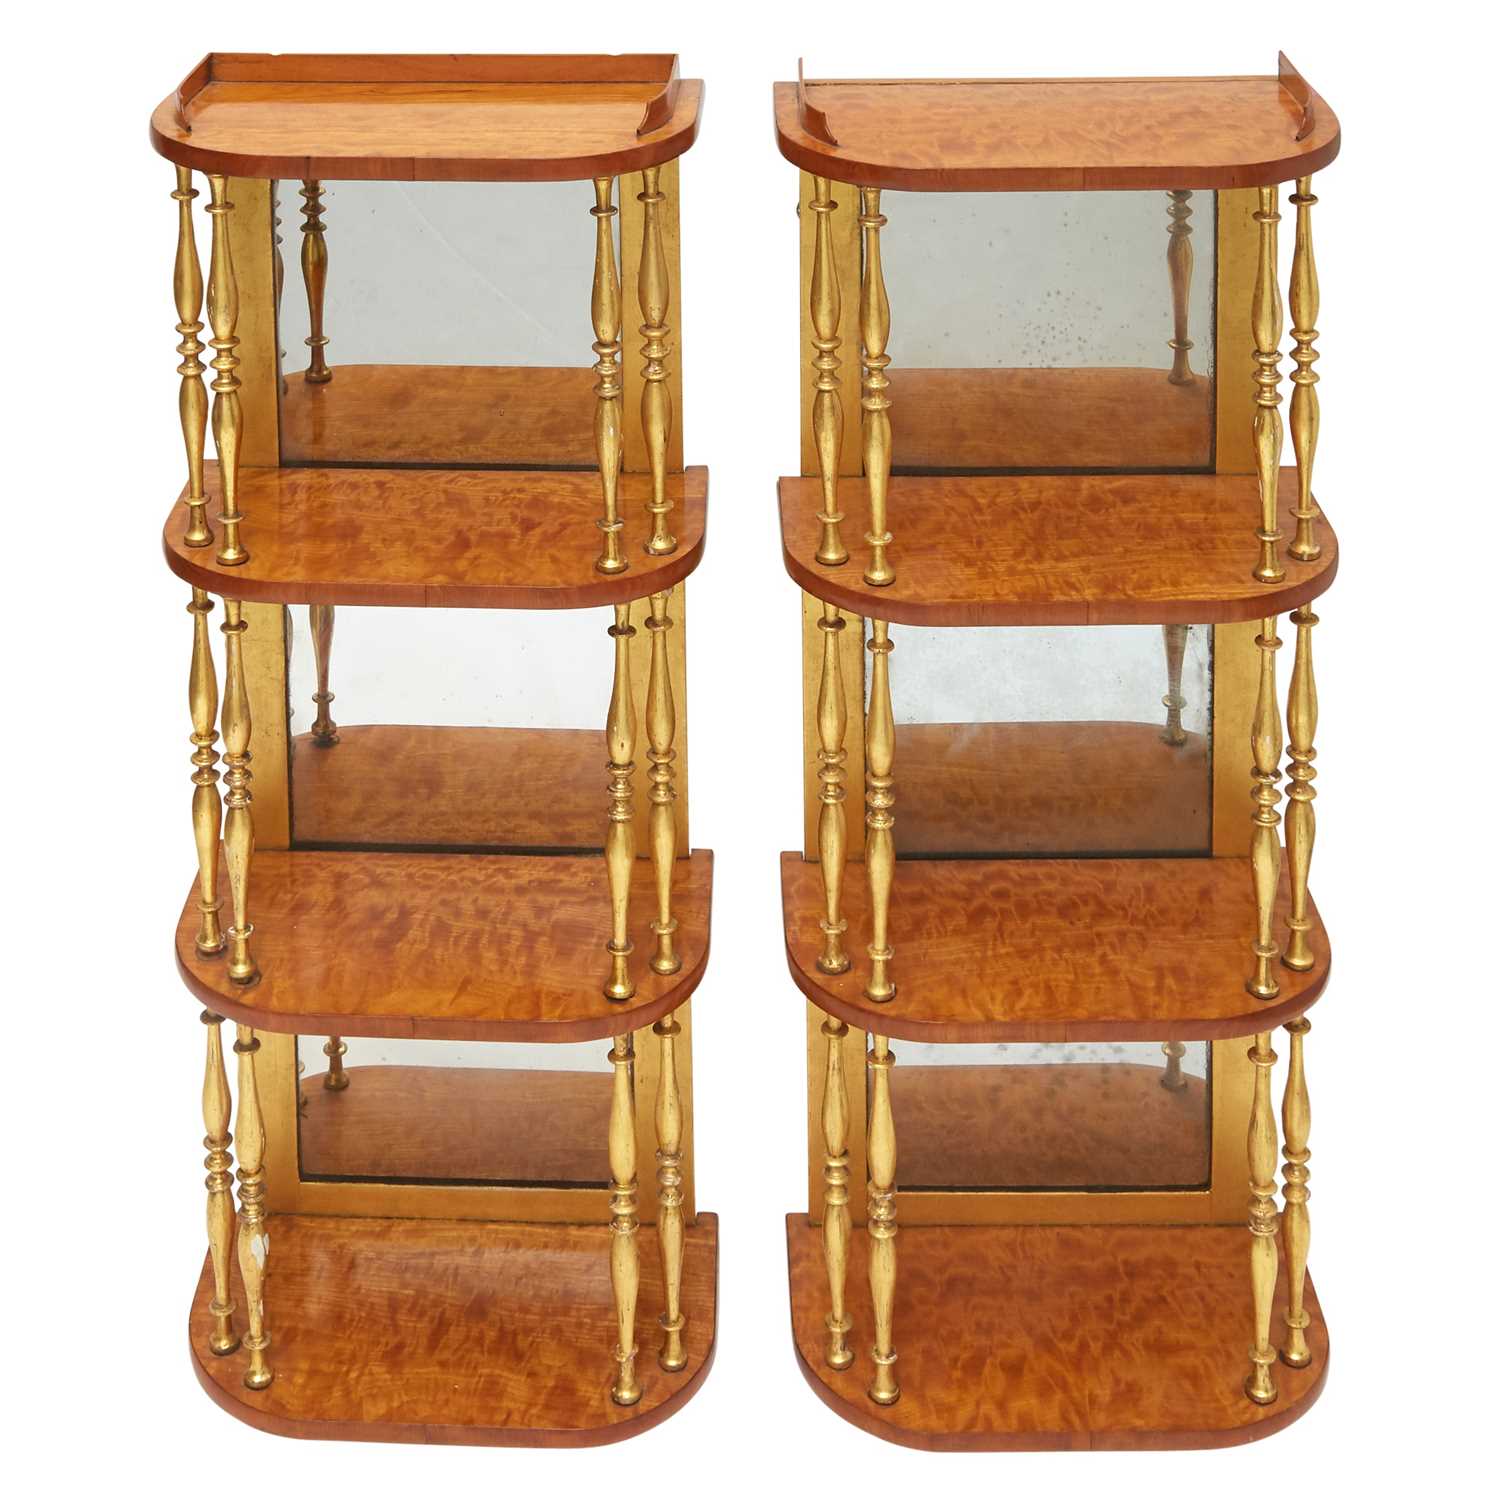 Lot 831 - Pair of Late George III Satinwood and Giltwood Hanging Shelves